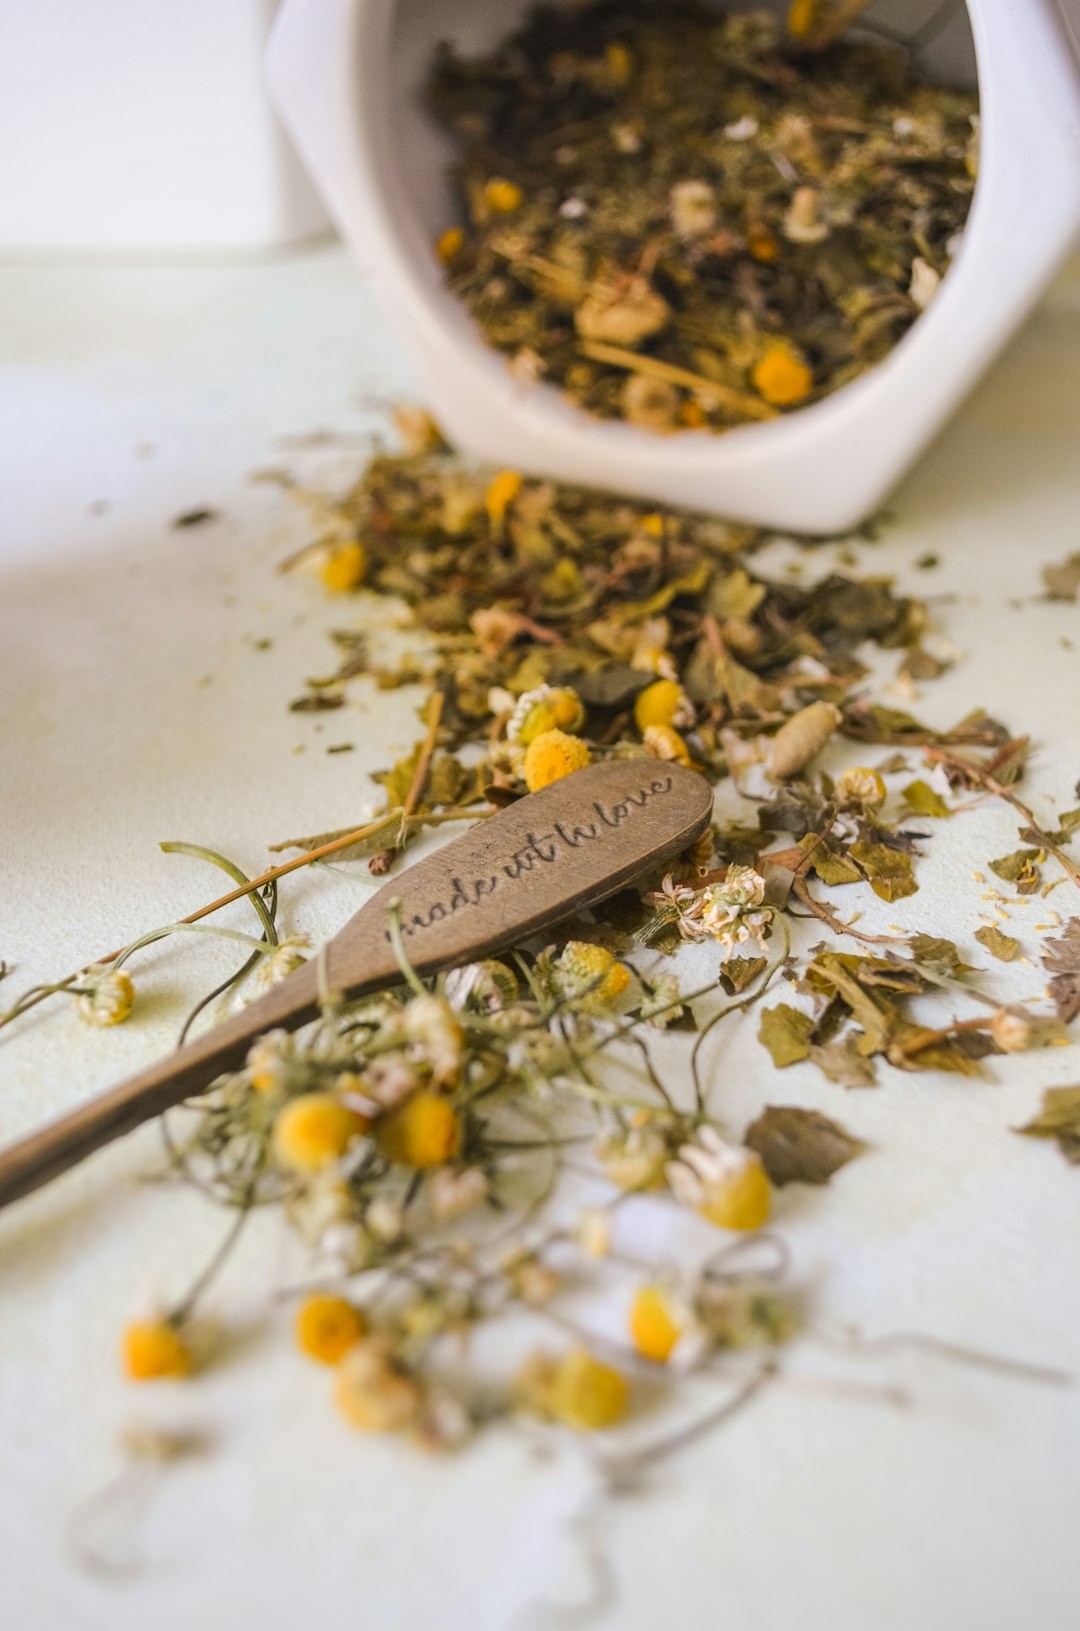 Chamomile and a spoon